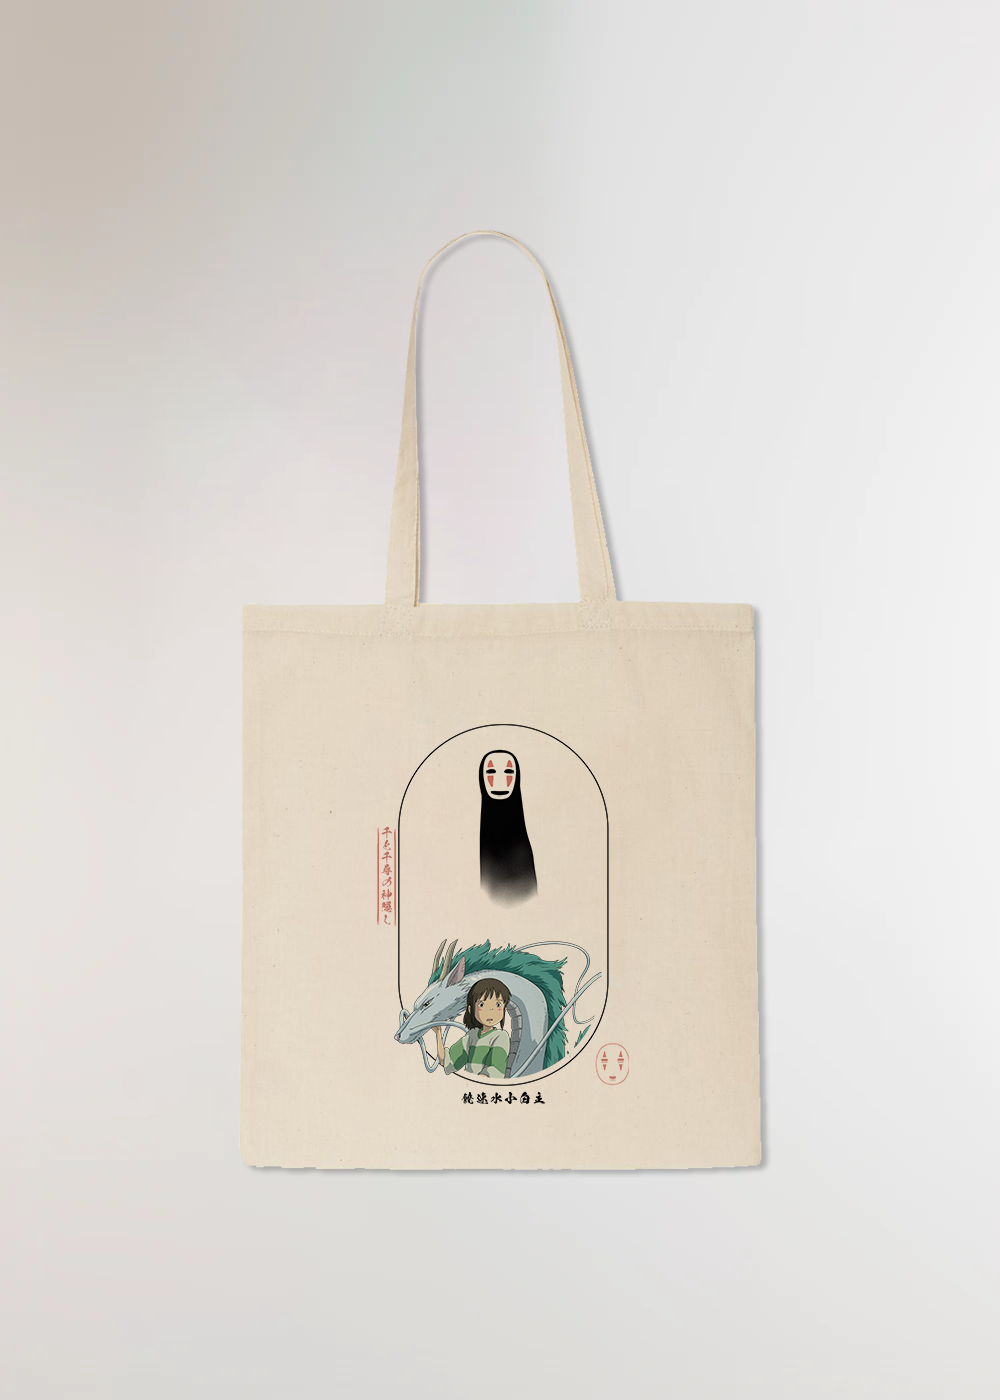 MADE IN JAPAN - ONE-THOUSAND® TOTE BAG